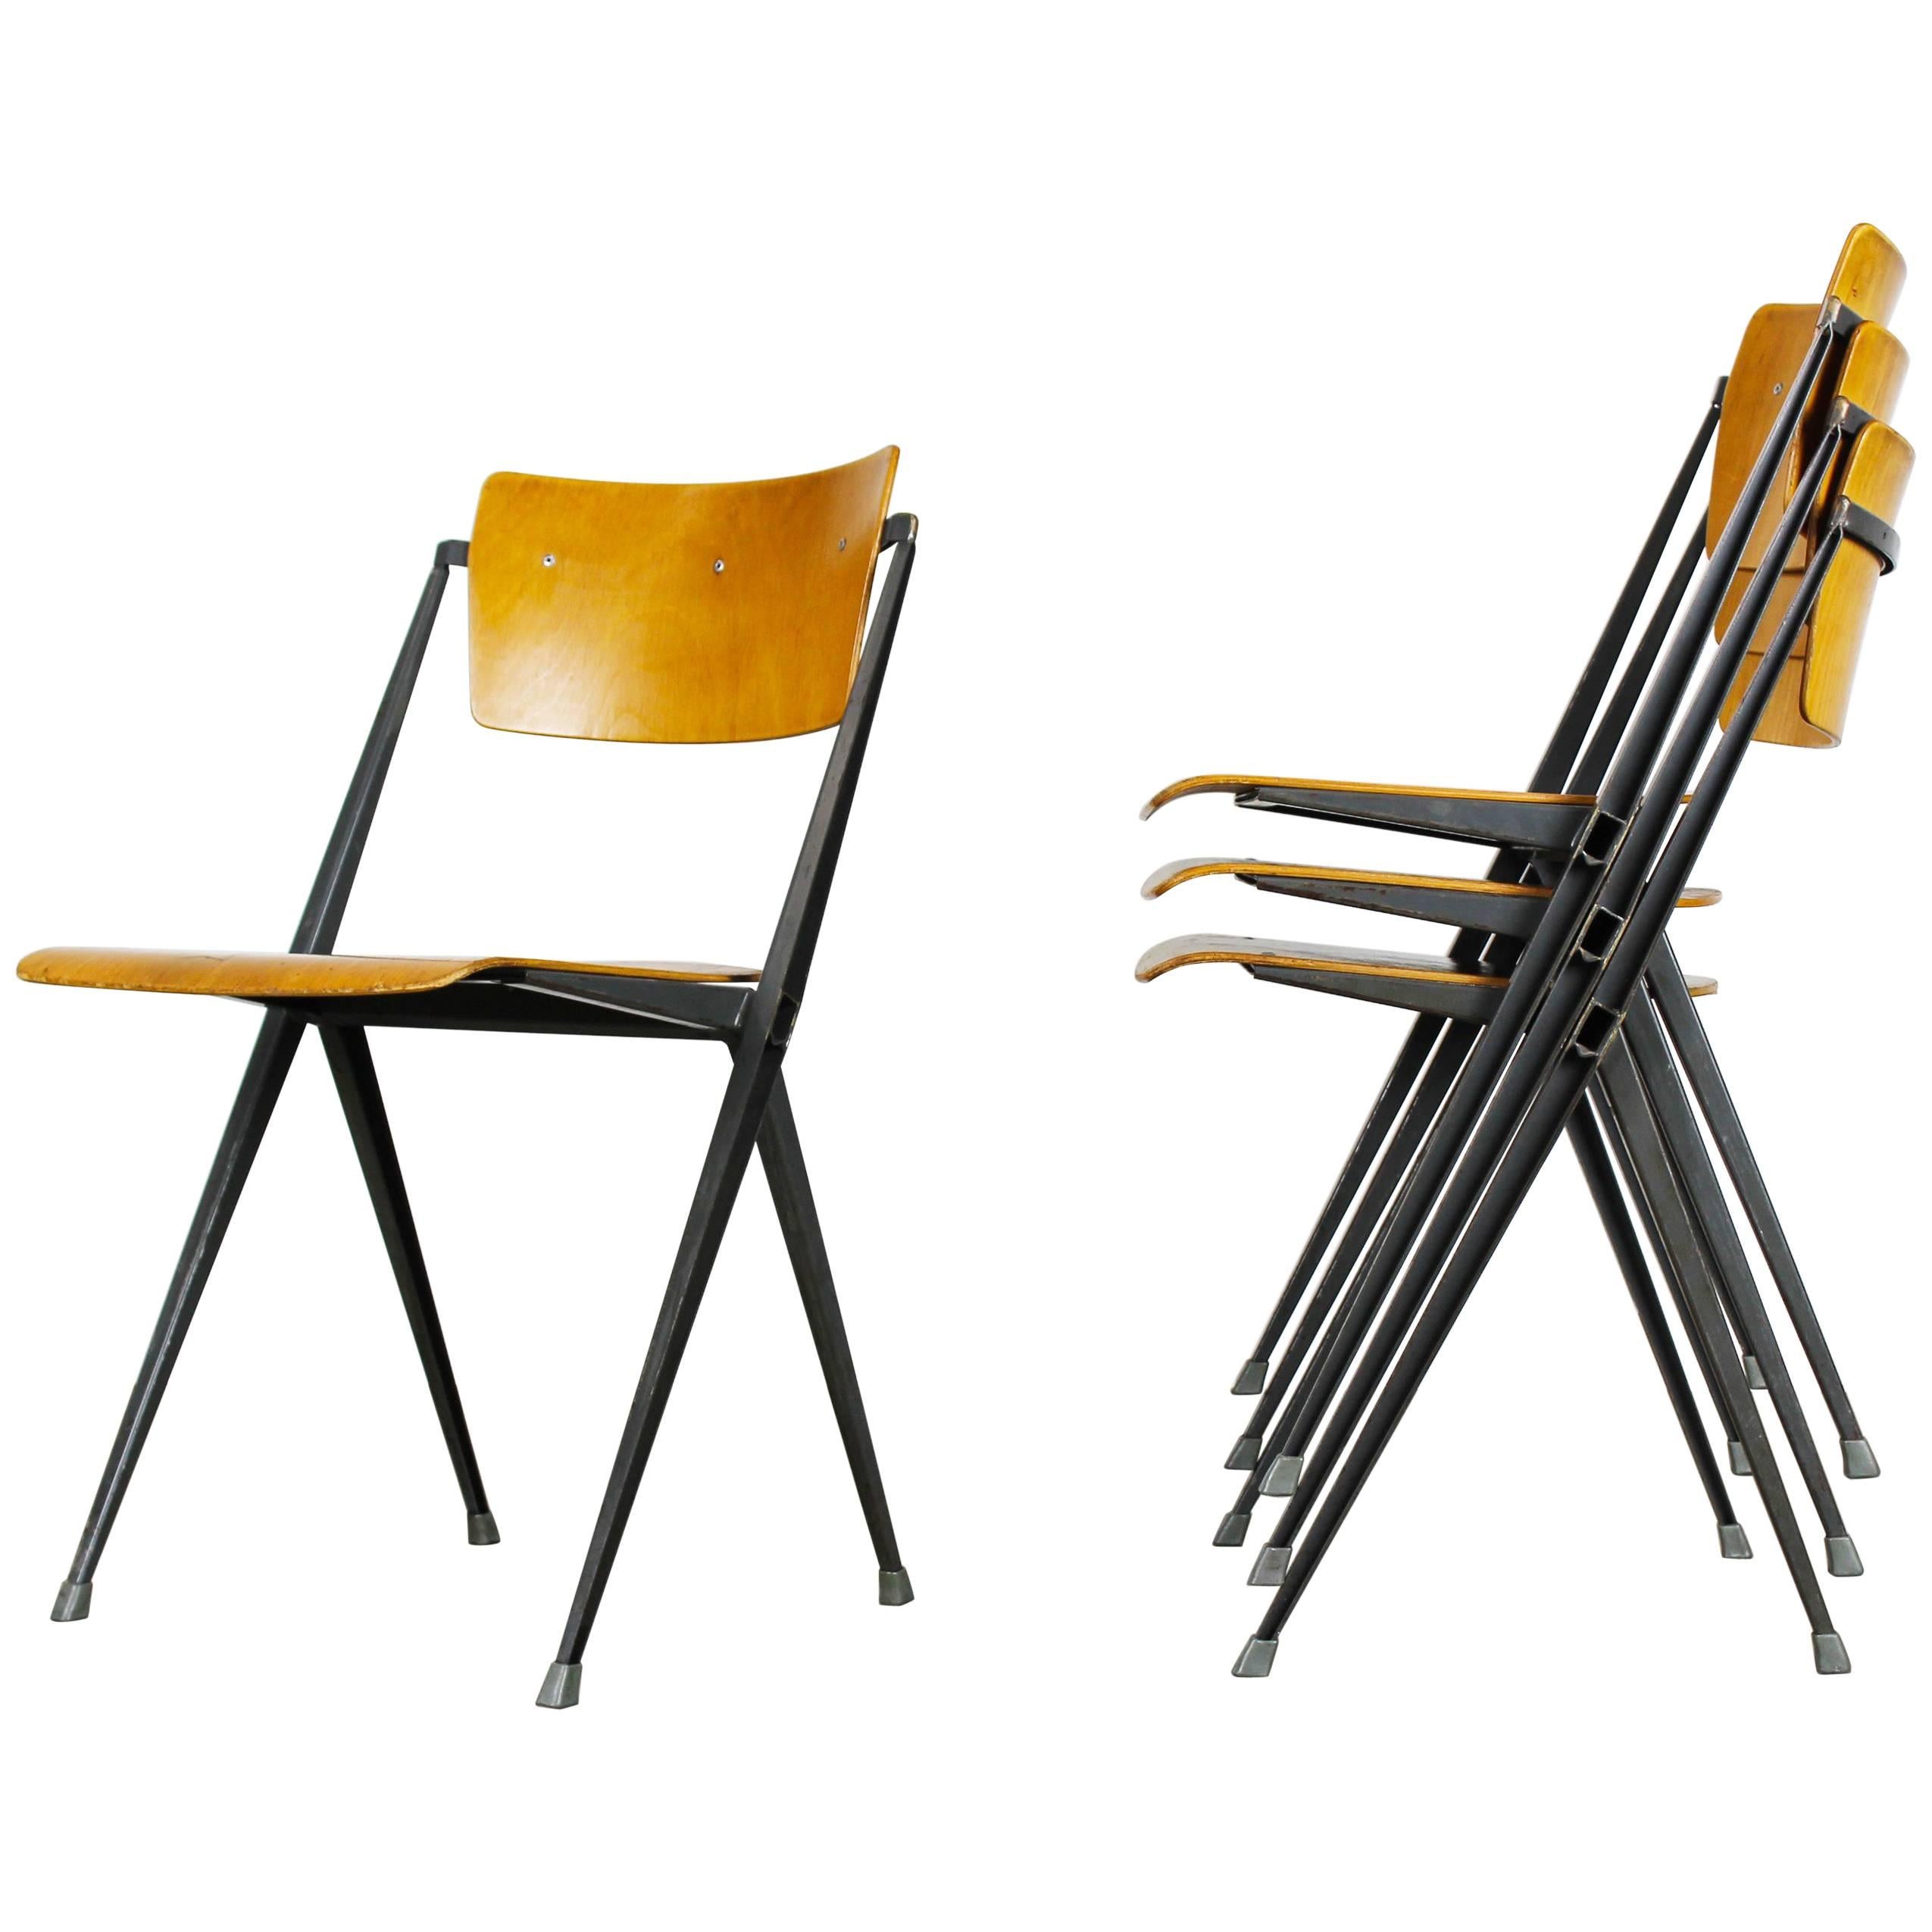 Set of Four Pyramid Chairs Designed by Wim Rietveld for Ahrend de Cirkel, 1963 For Sale